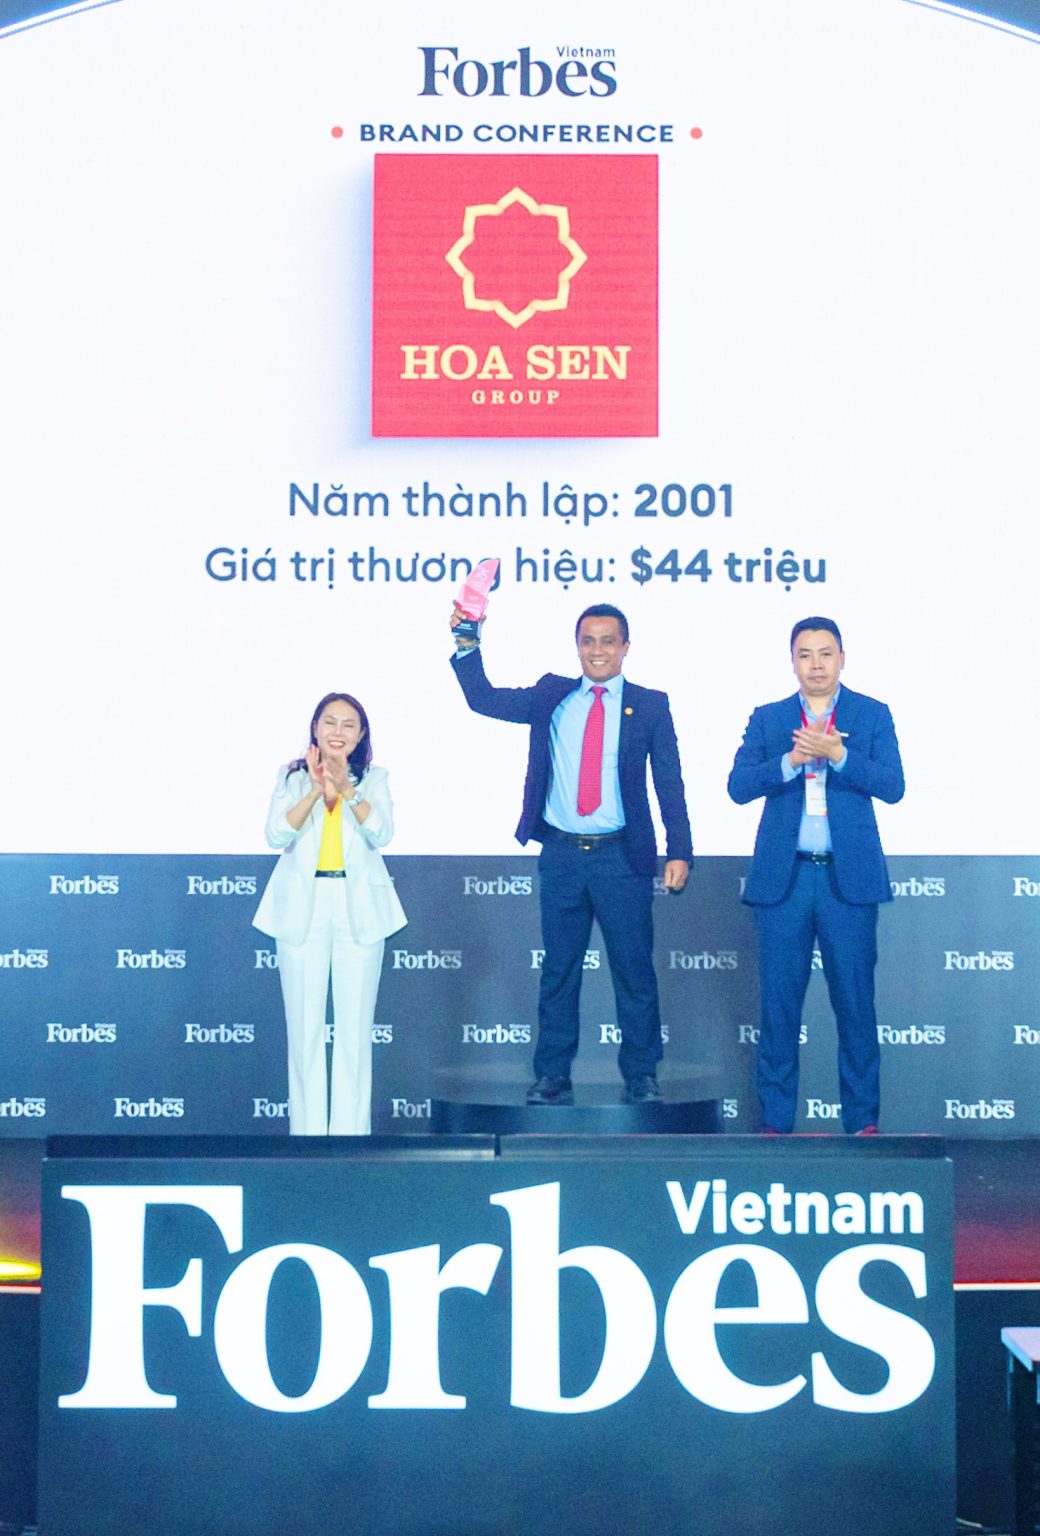 Hoa Sen Group was honored in the list of TOP 25 leading consumer goods and industrial companies